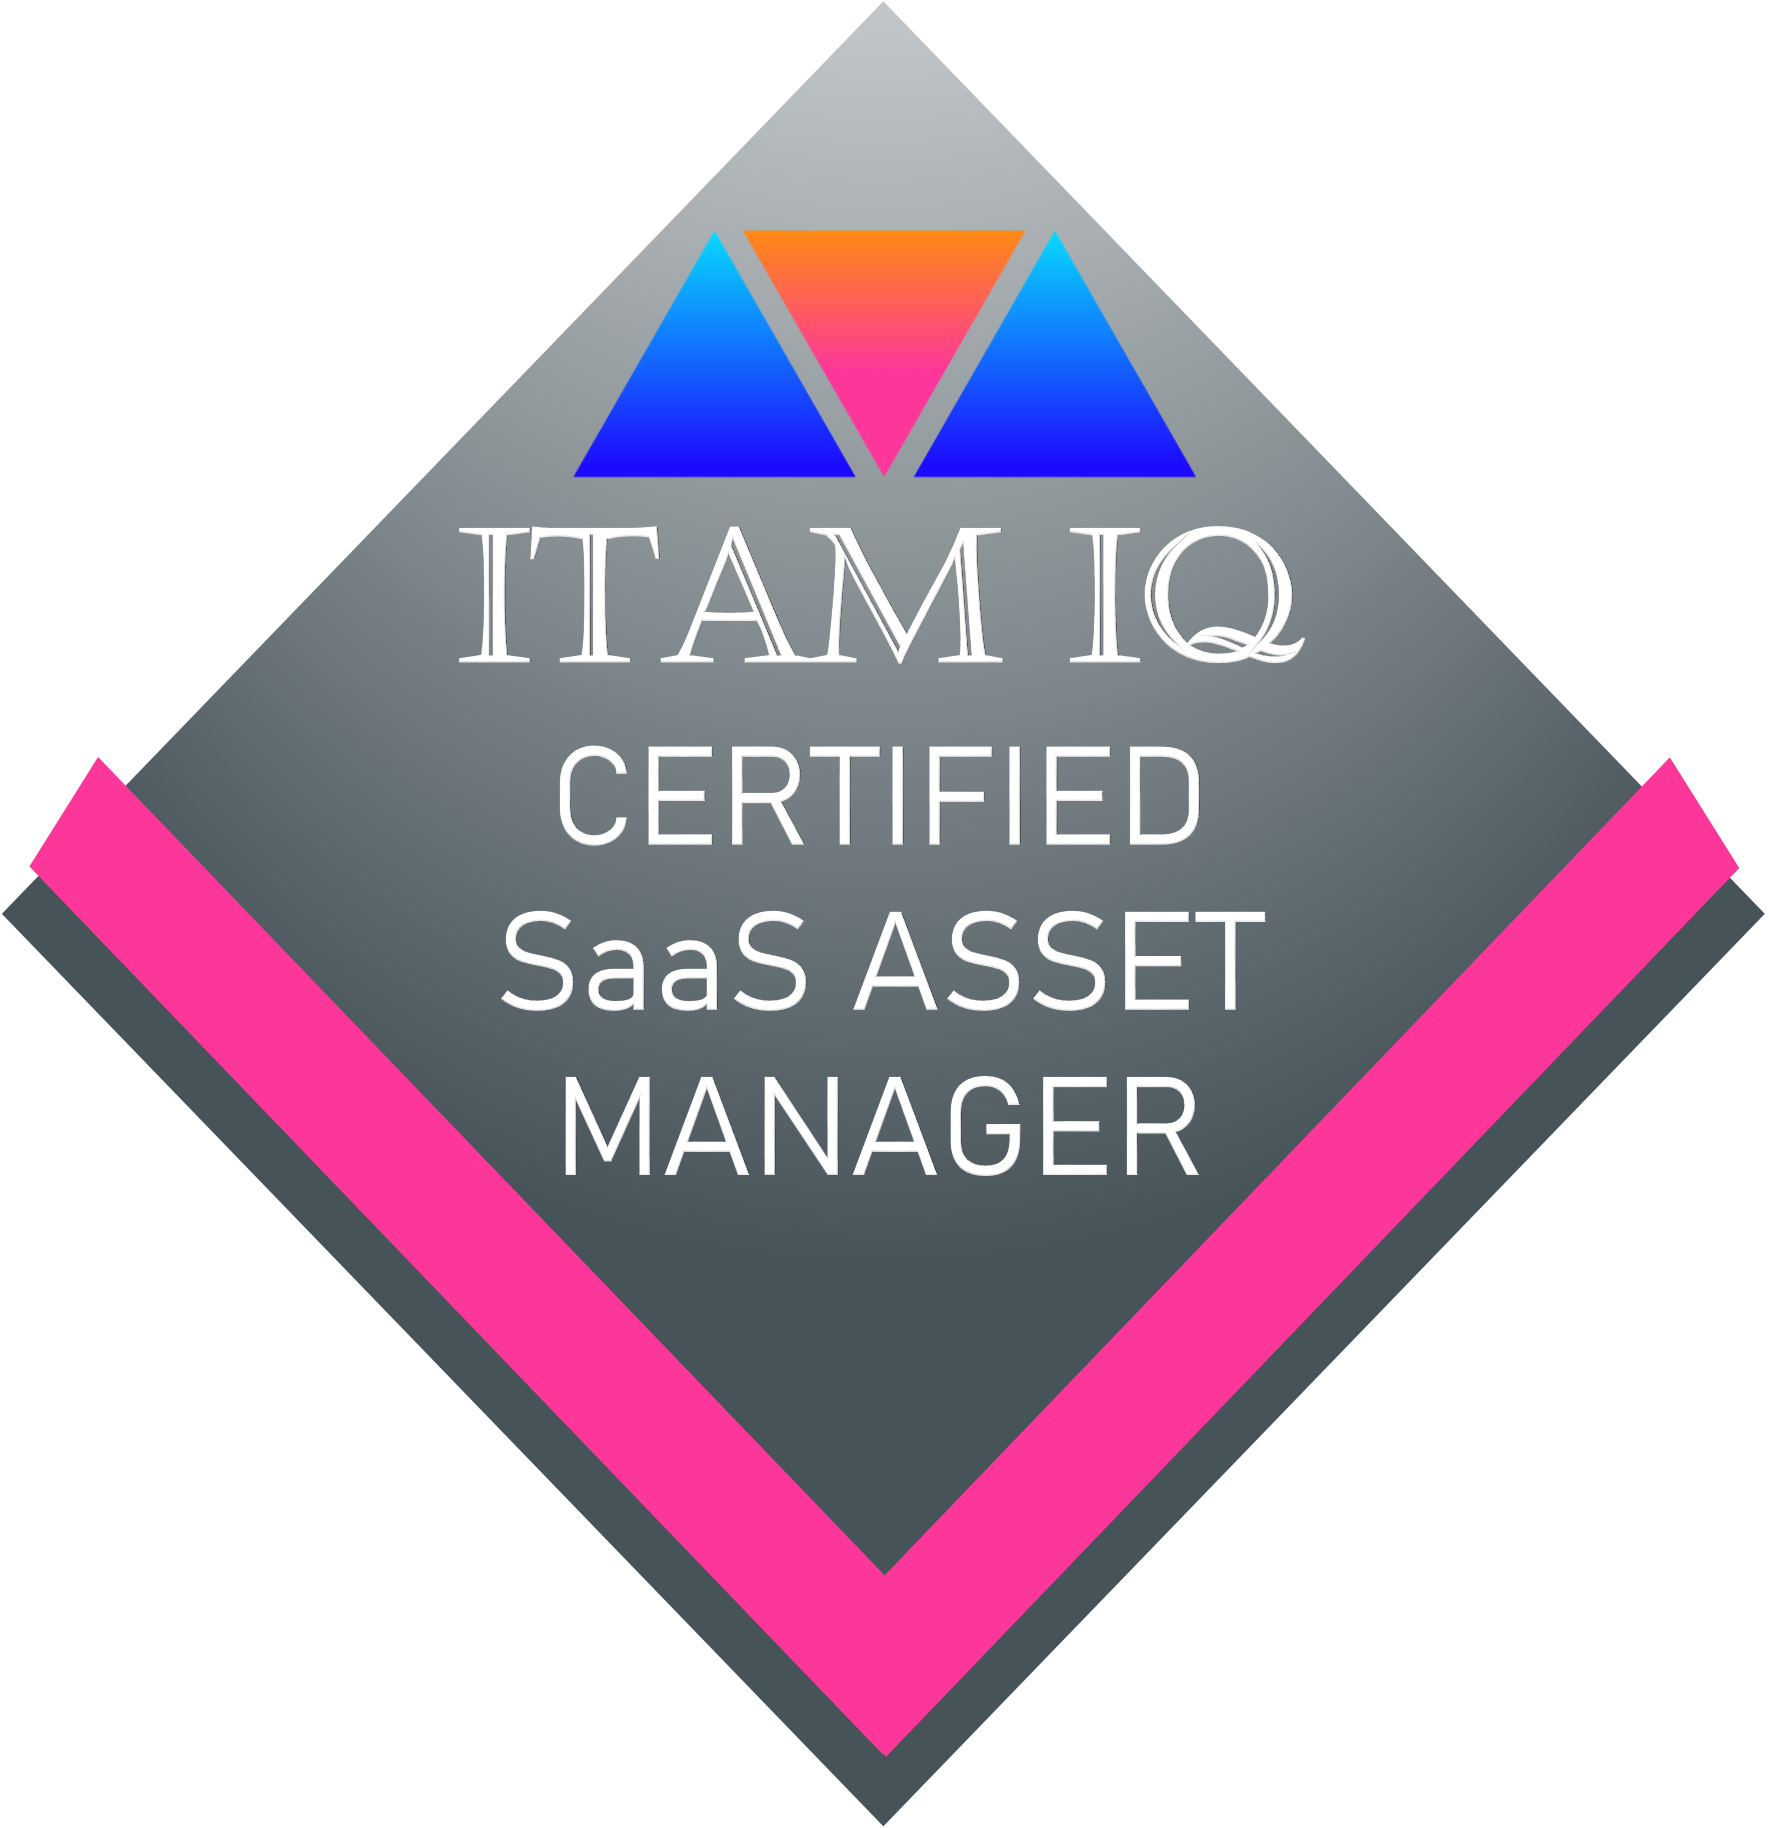 ITAM IQ's Certified SaaS Asset Manager badge